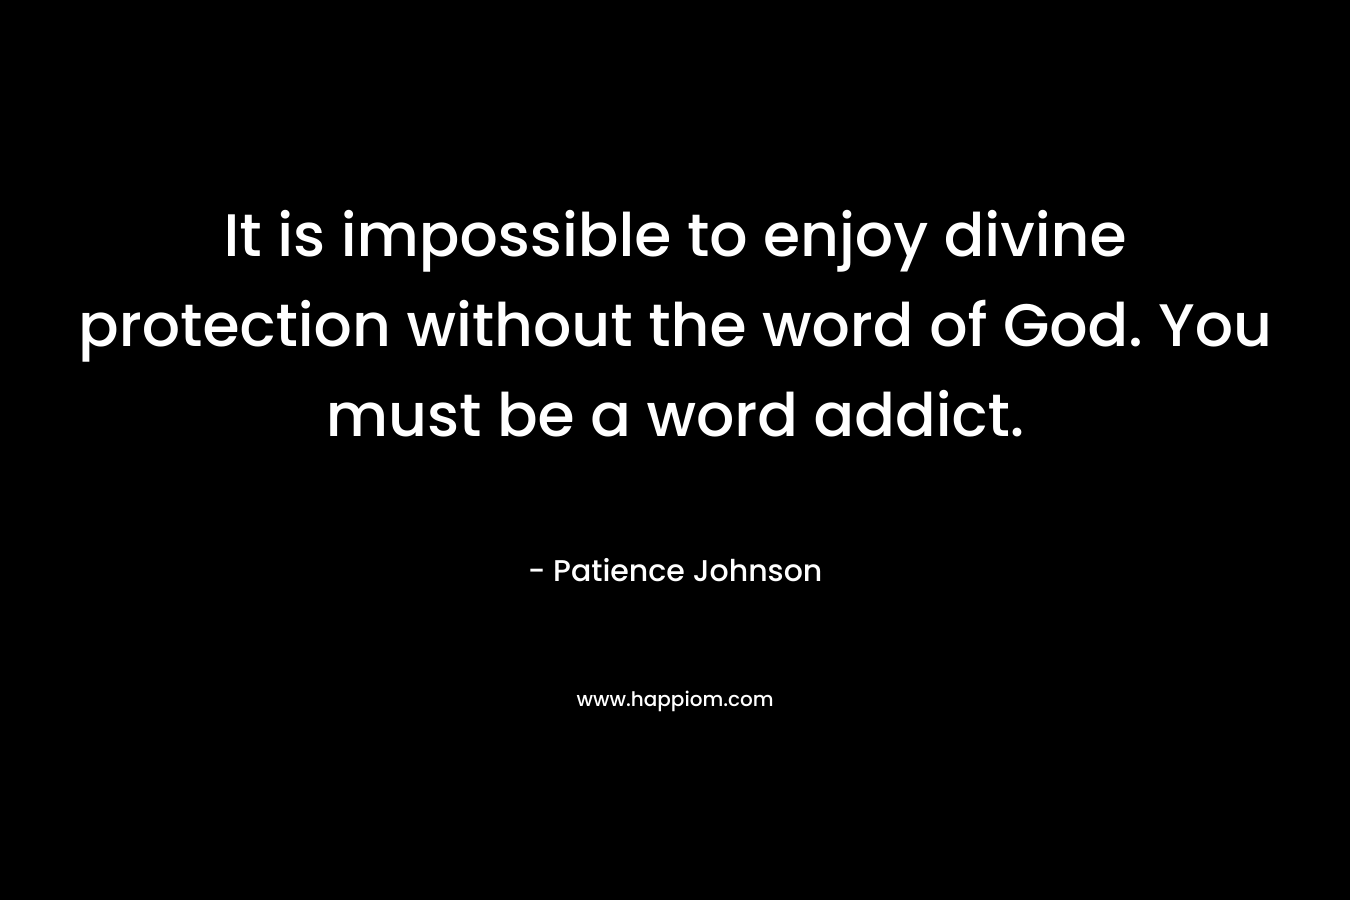 It is impossible to enjoy divine protection without the word of God. You must be a word addict. – Patience Johnson